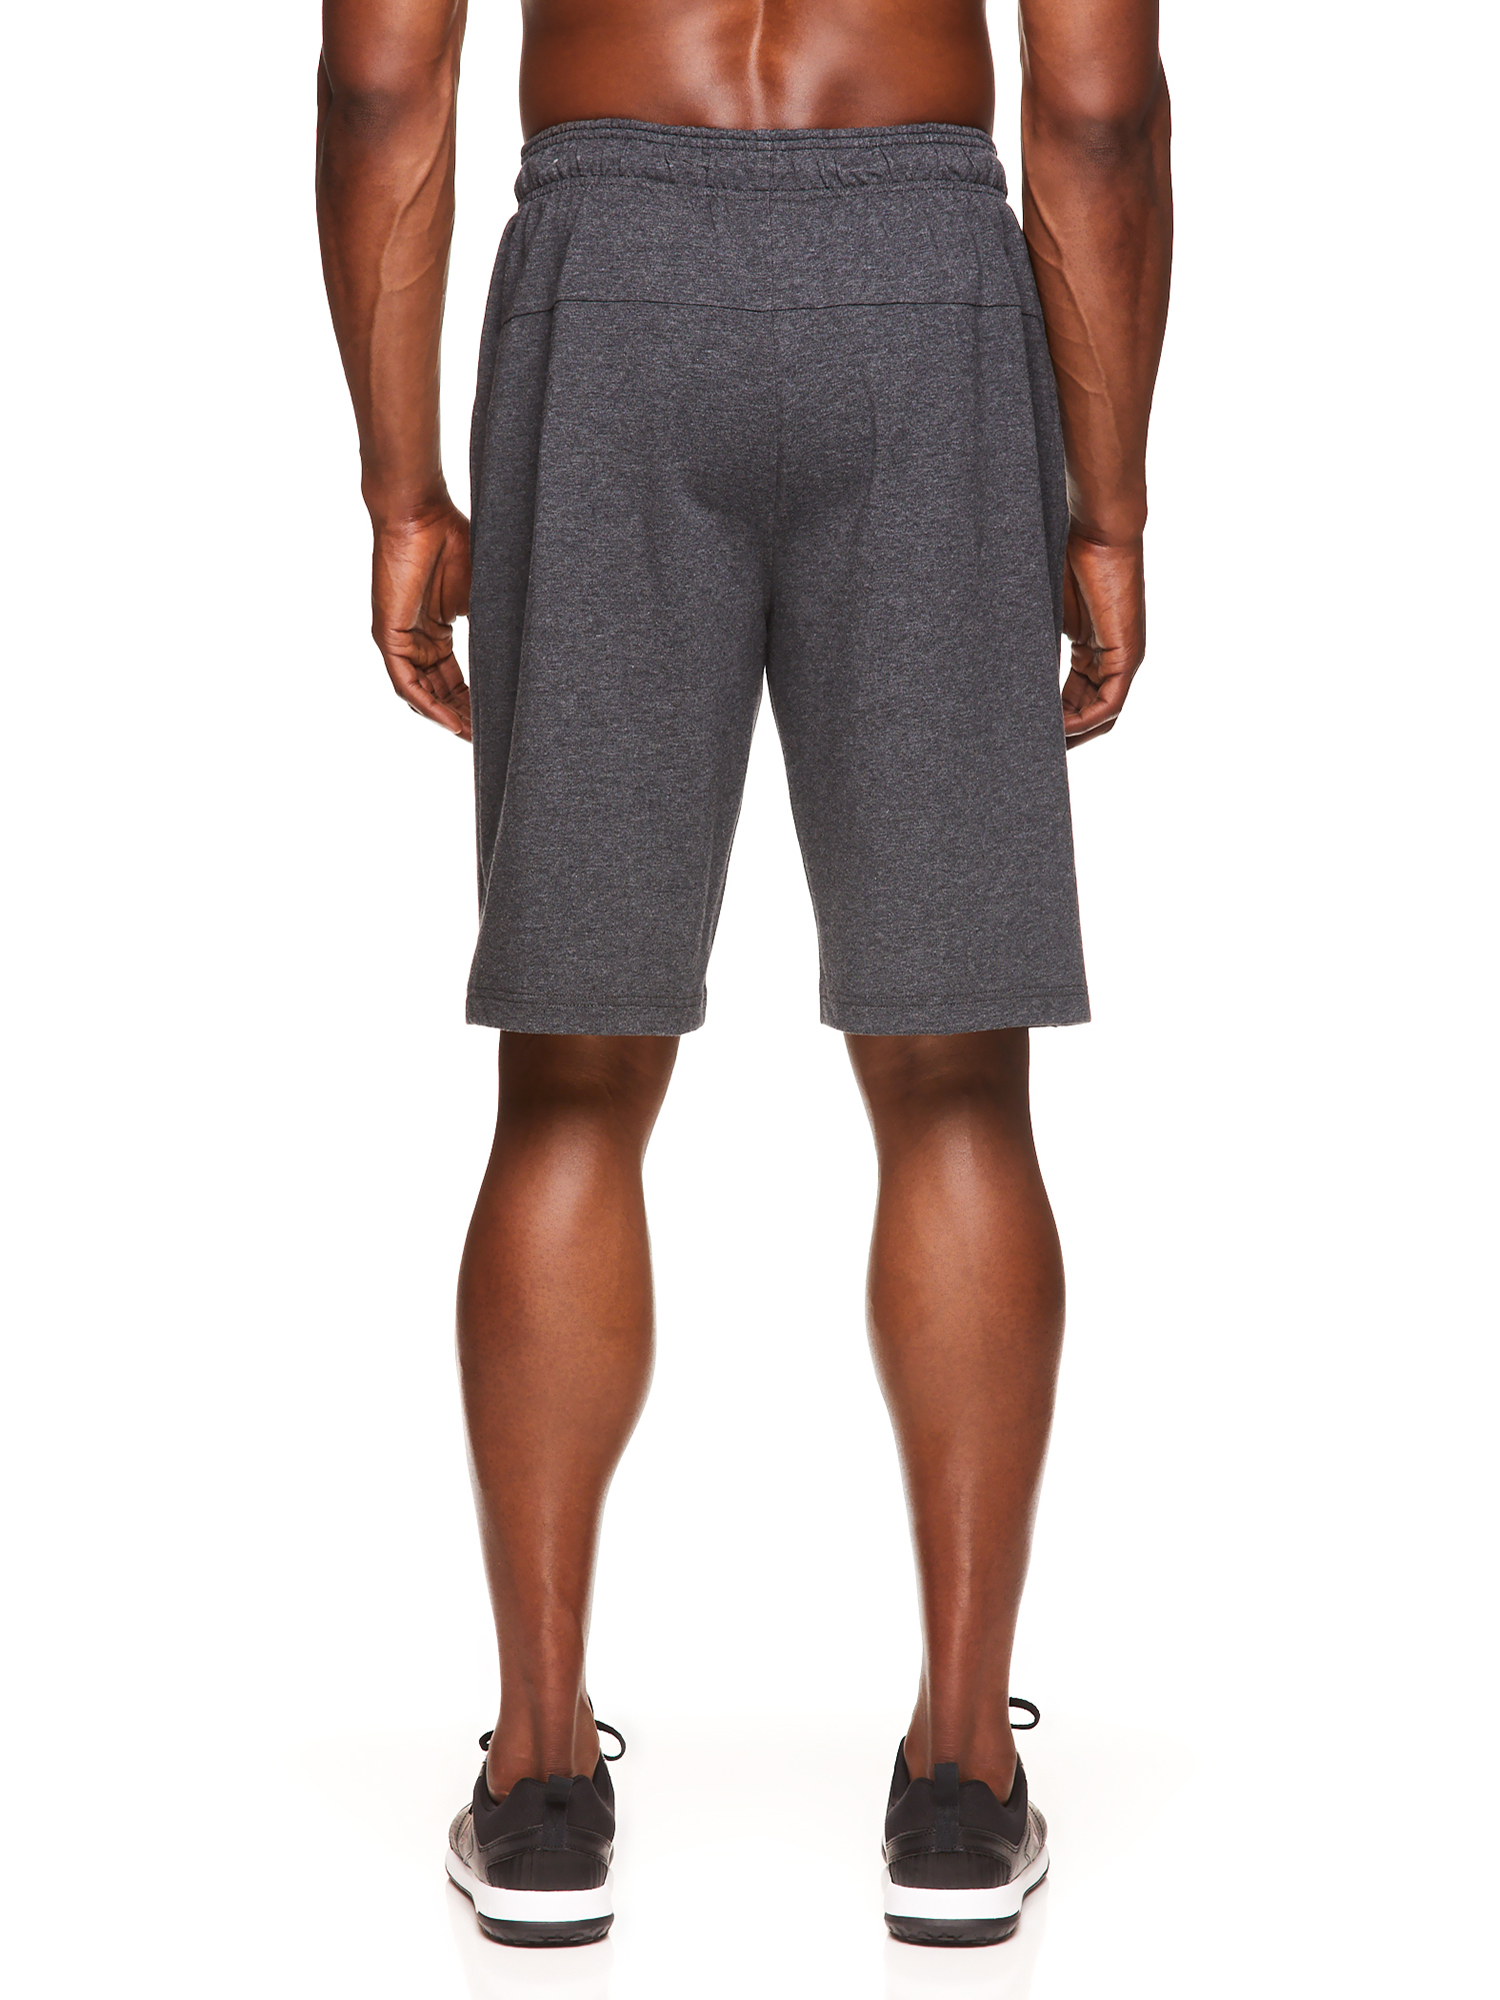 Reebok Men's and Big Men's Active Tech Terry Shorts, 10" Inseam Basketball Shorts, up to Size 3XL - image 3 of 4